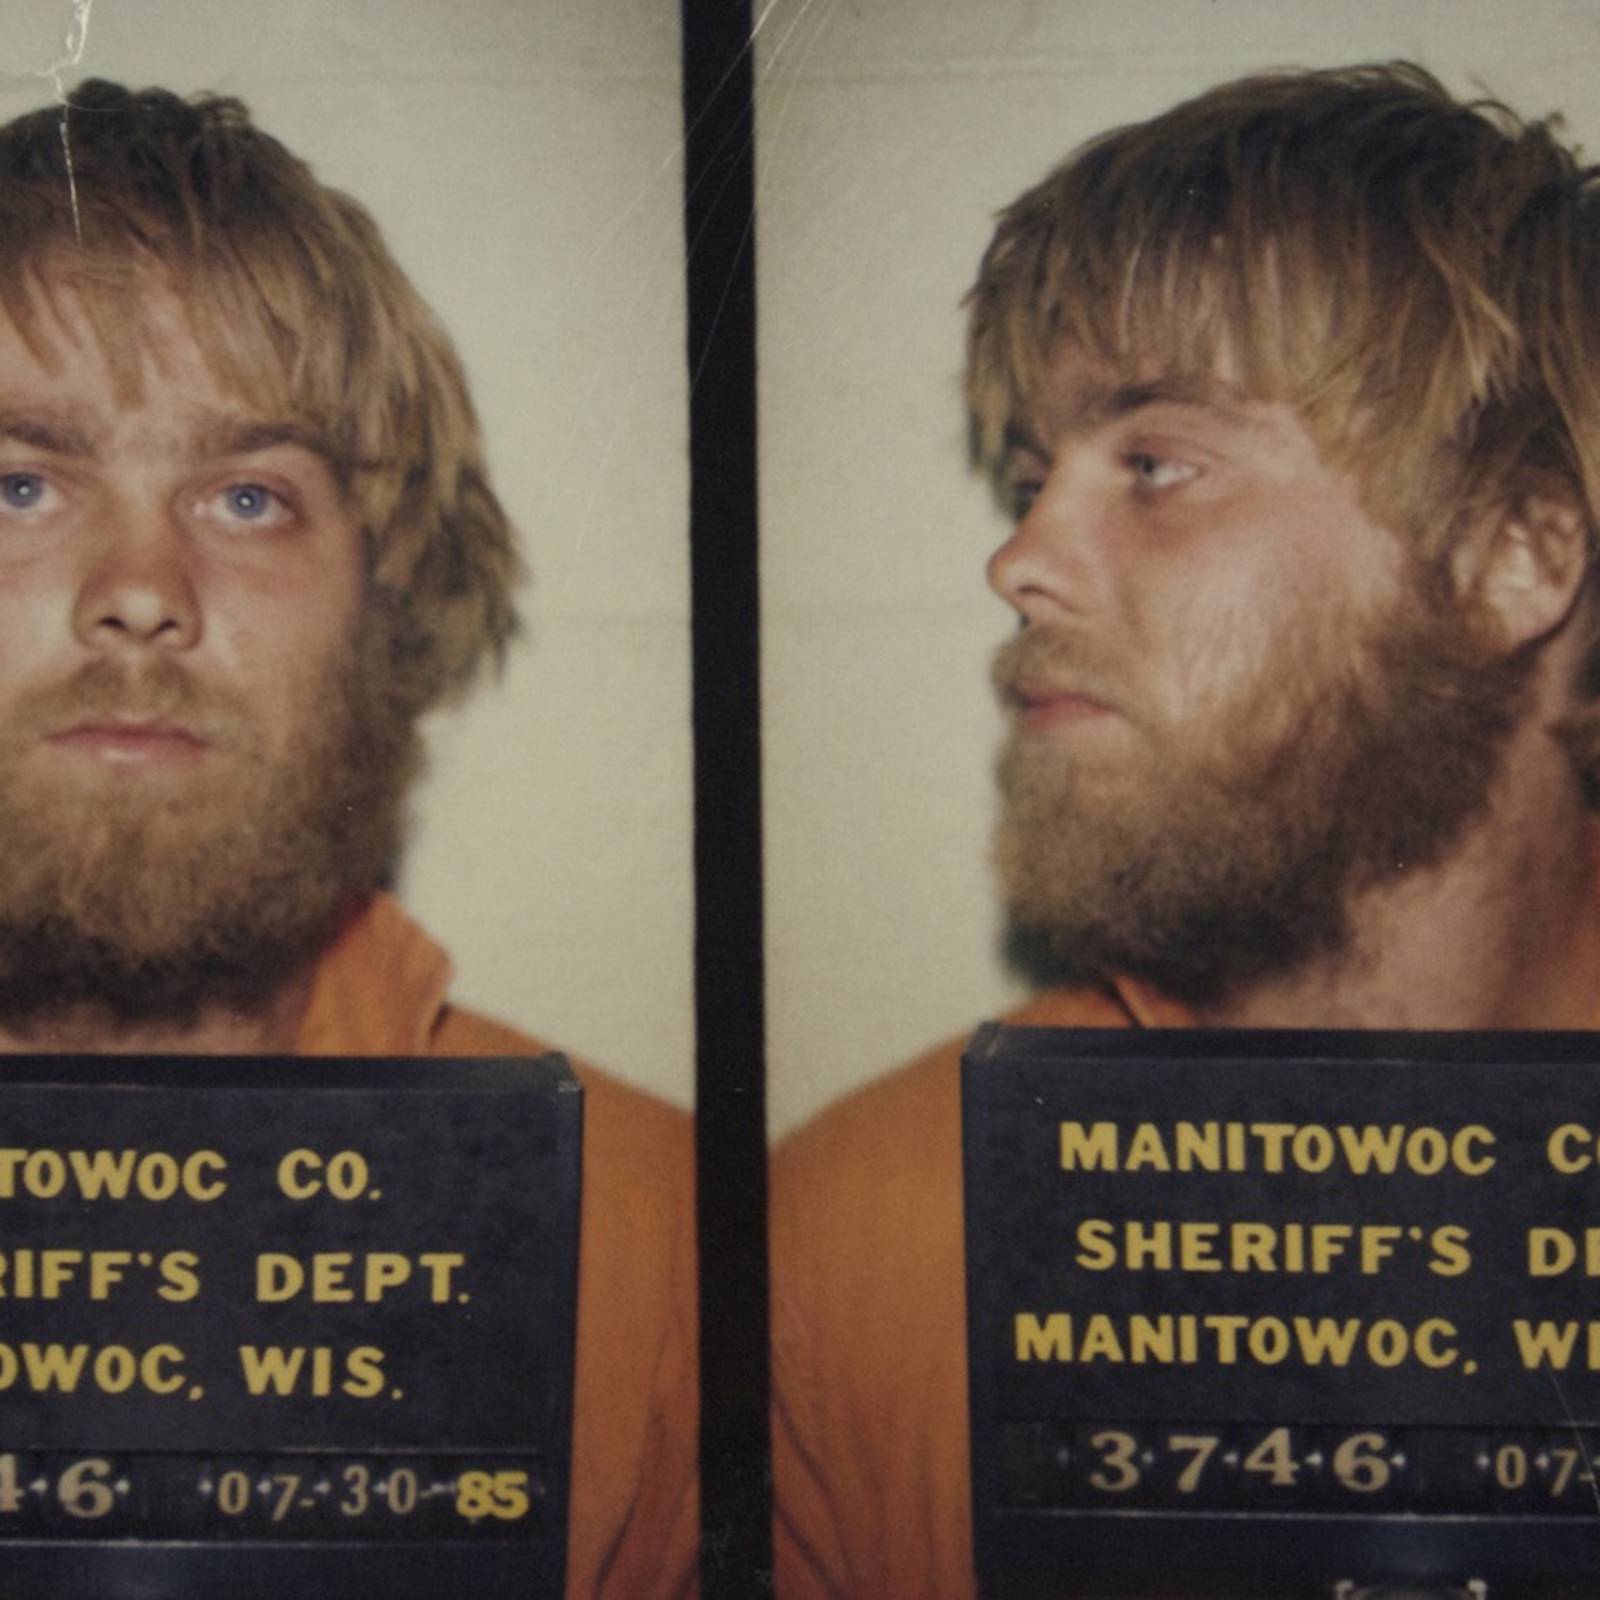 Making A Murderer's Steven Avery is ENGAGED to a Las Vegas blonde